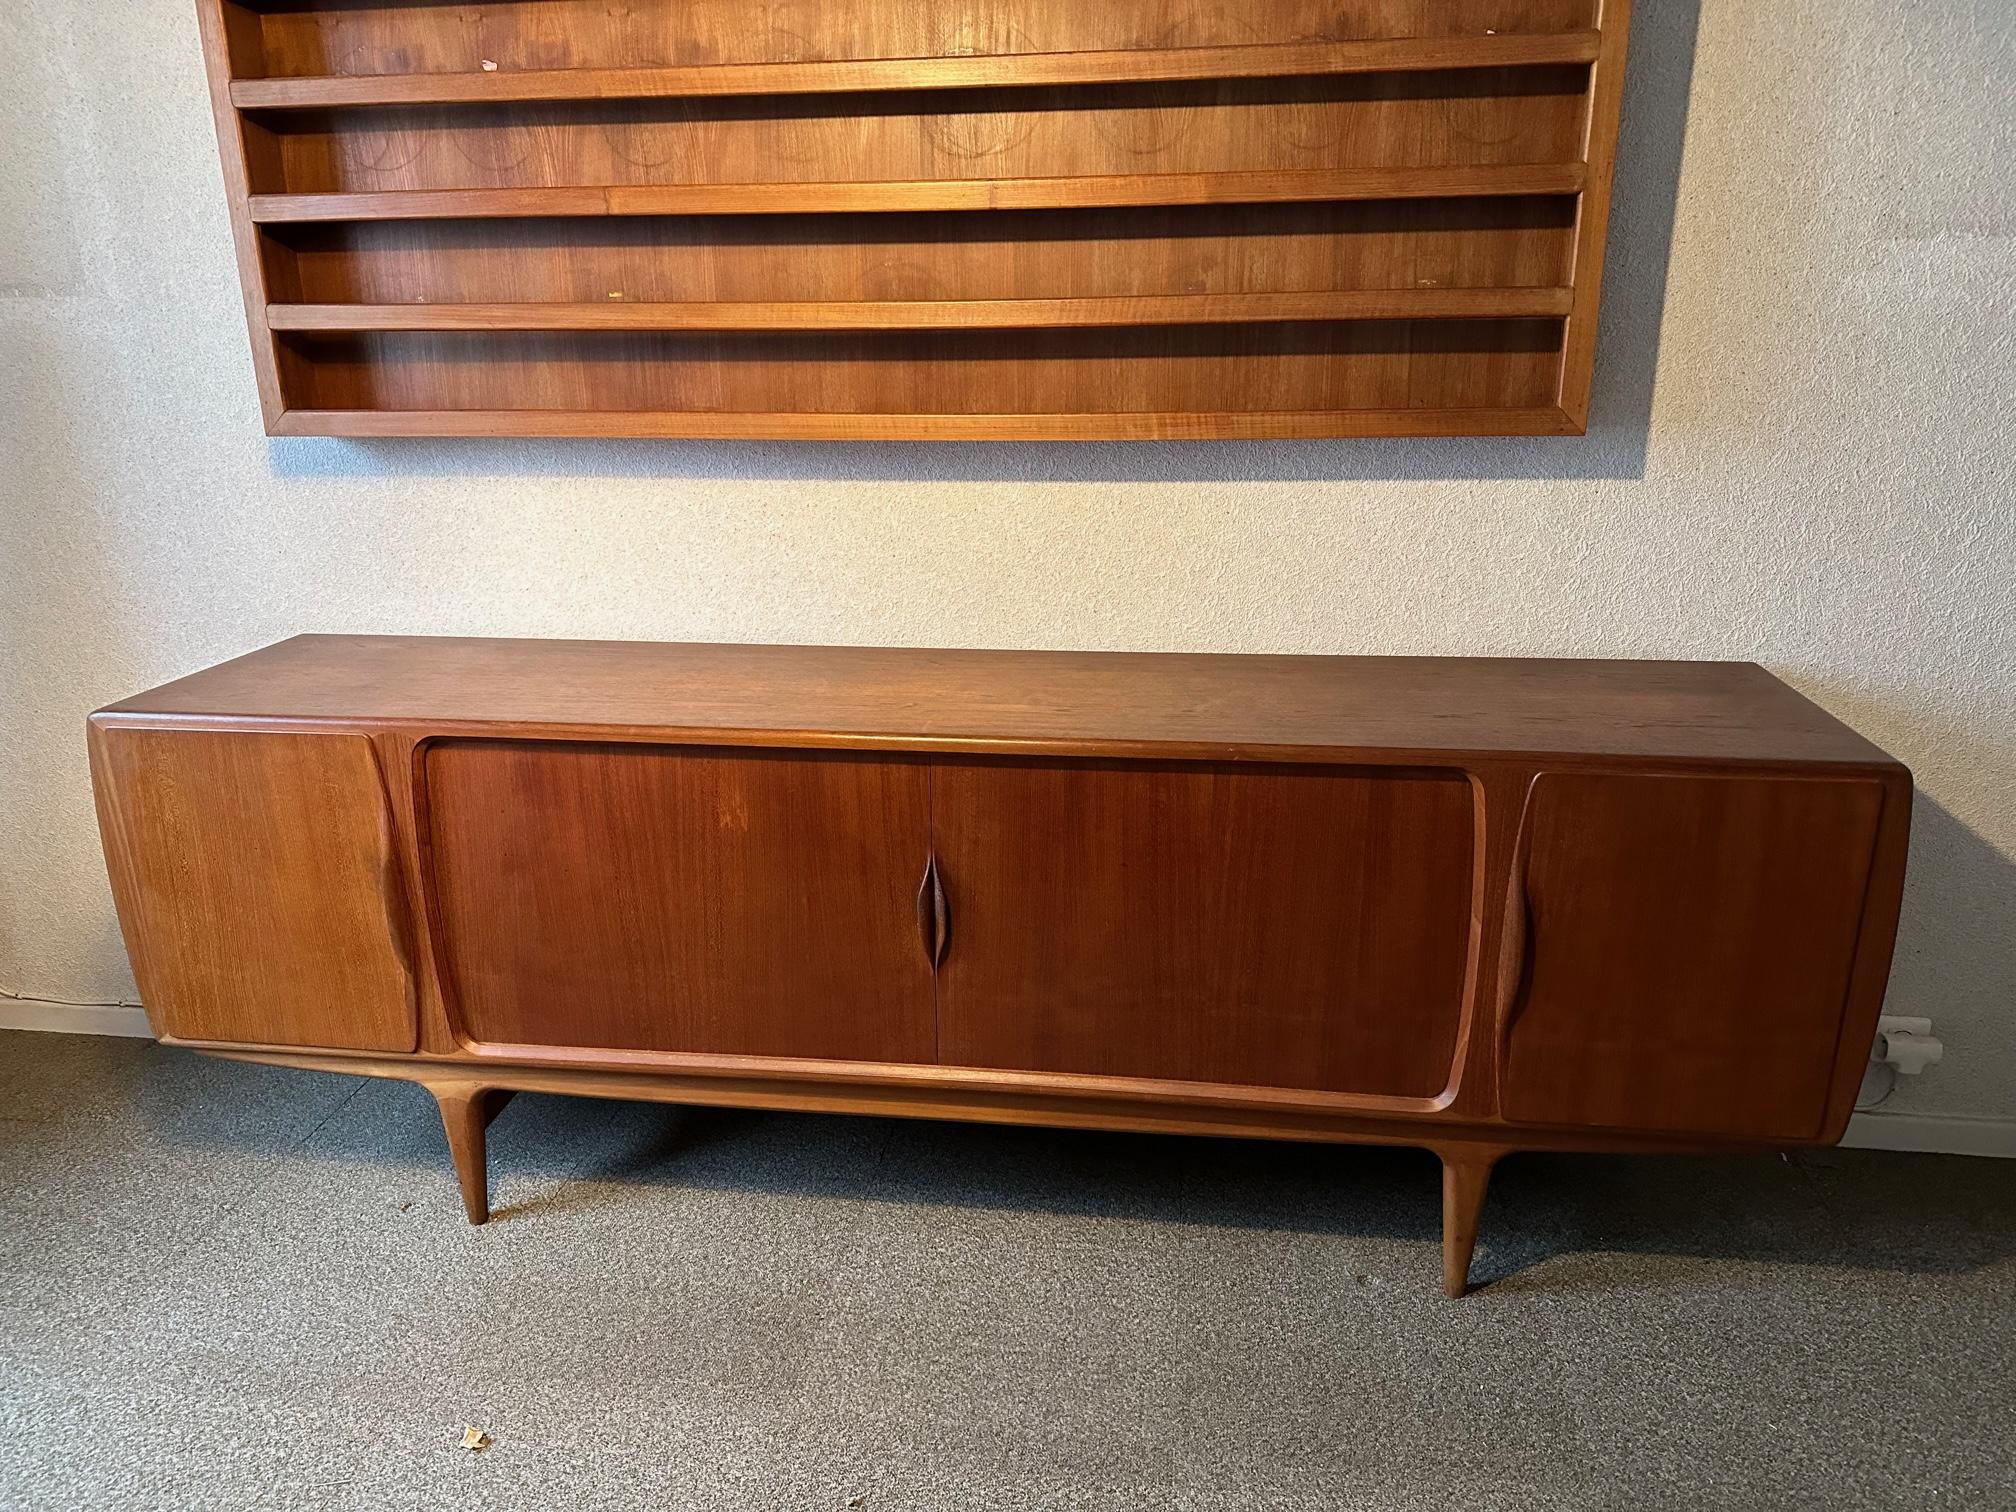 Very beautiful and elegant teak sideboard from the 60s by Johannes Andersen, Danish designer.
Very good state. Two peripheral doors and two central sliding curtains.
Three central drawers and numerous modular shelves.
Slightly rounded sides. Very